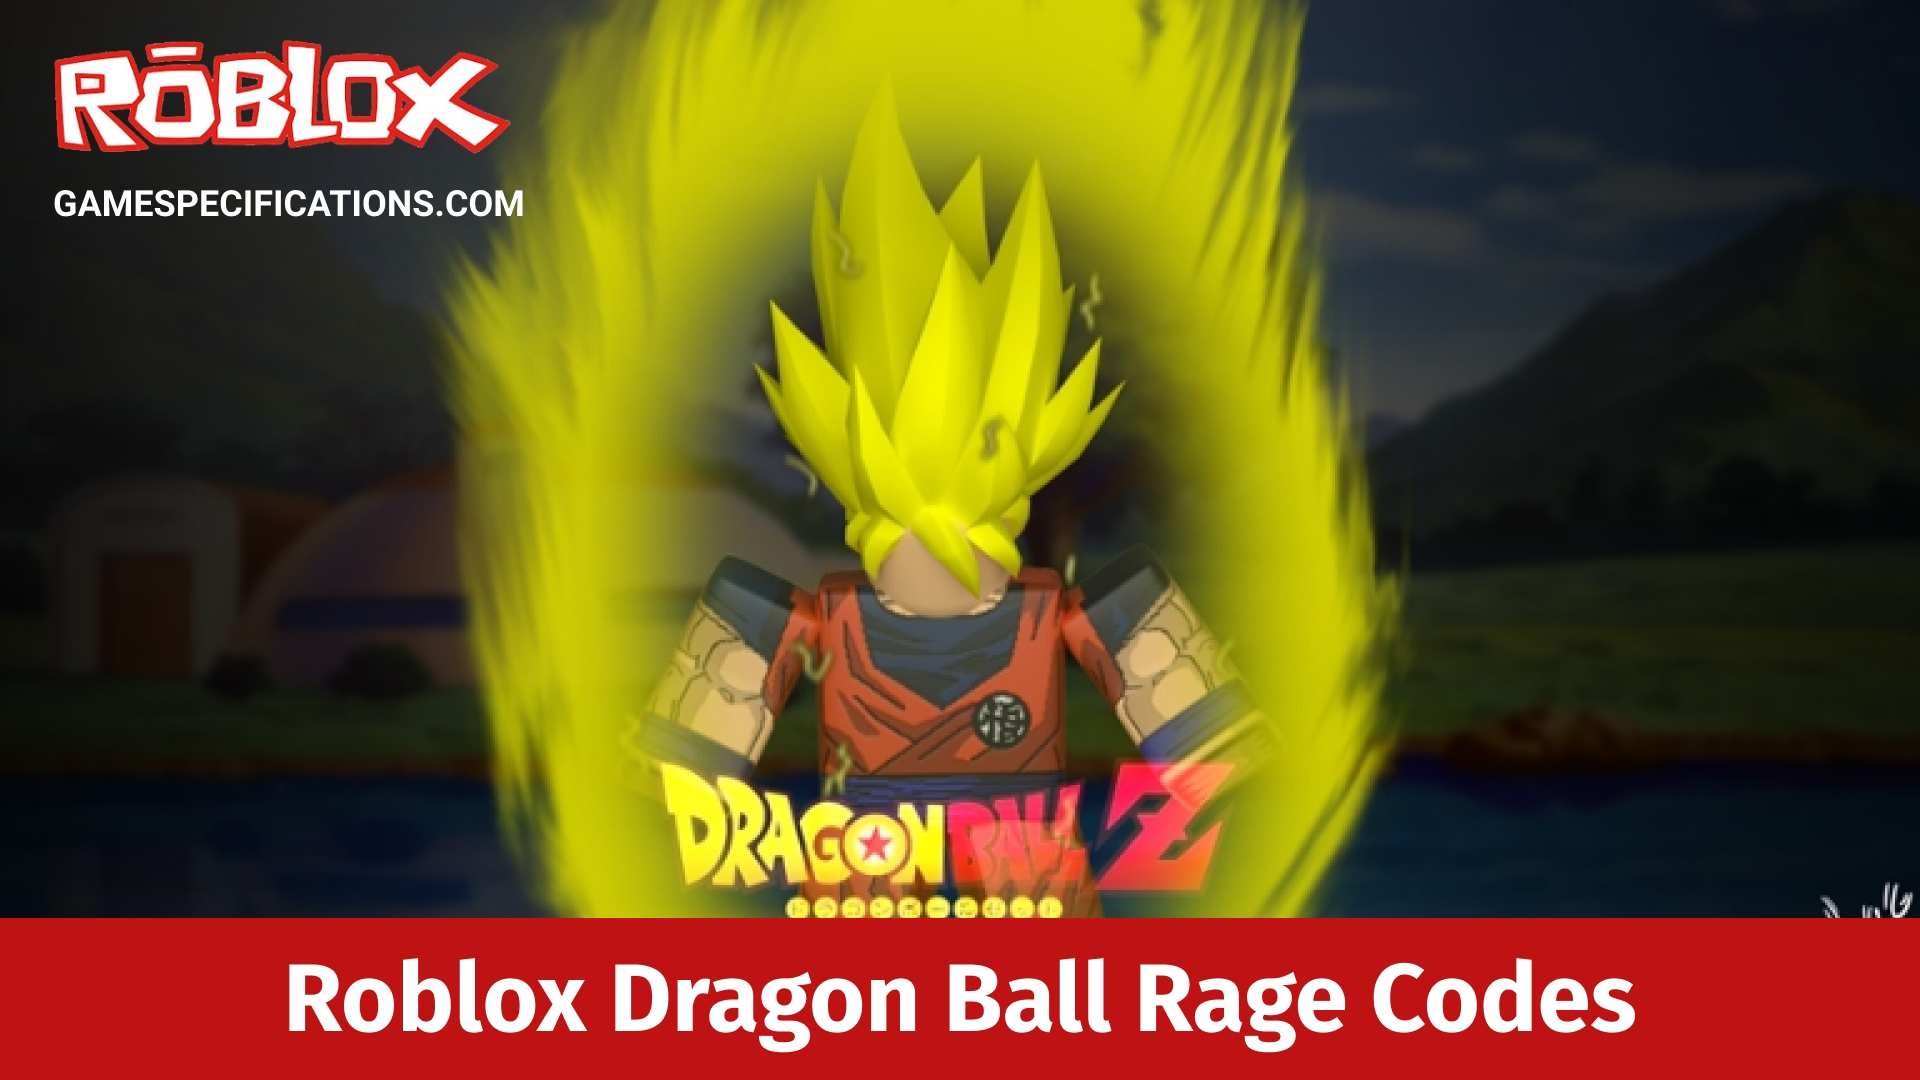 Roblox Dragon Ball Rage Codes July 2021 Game Specifications